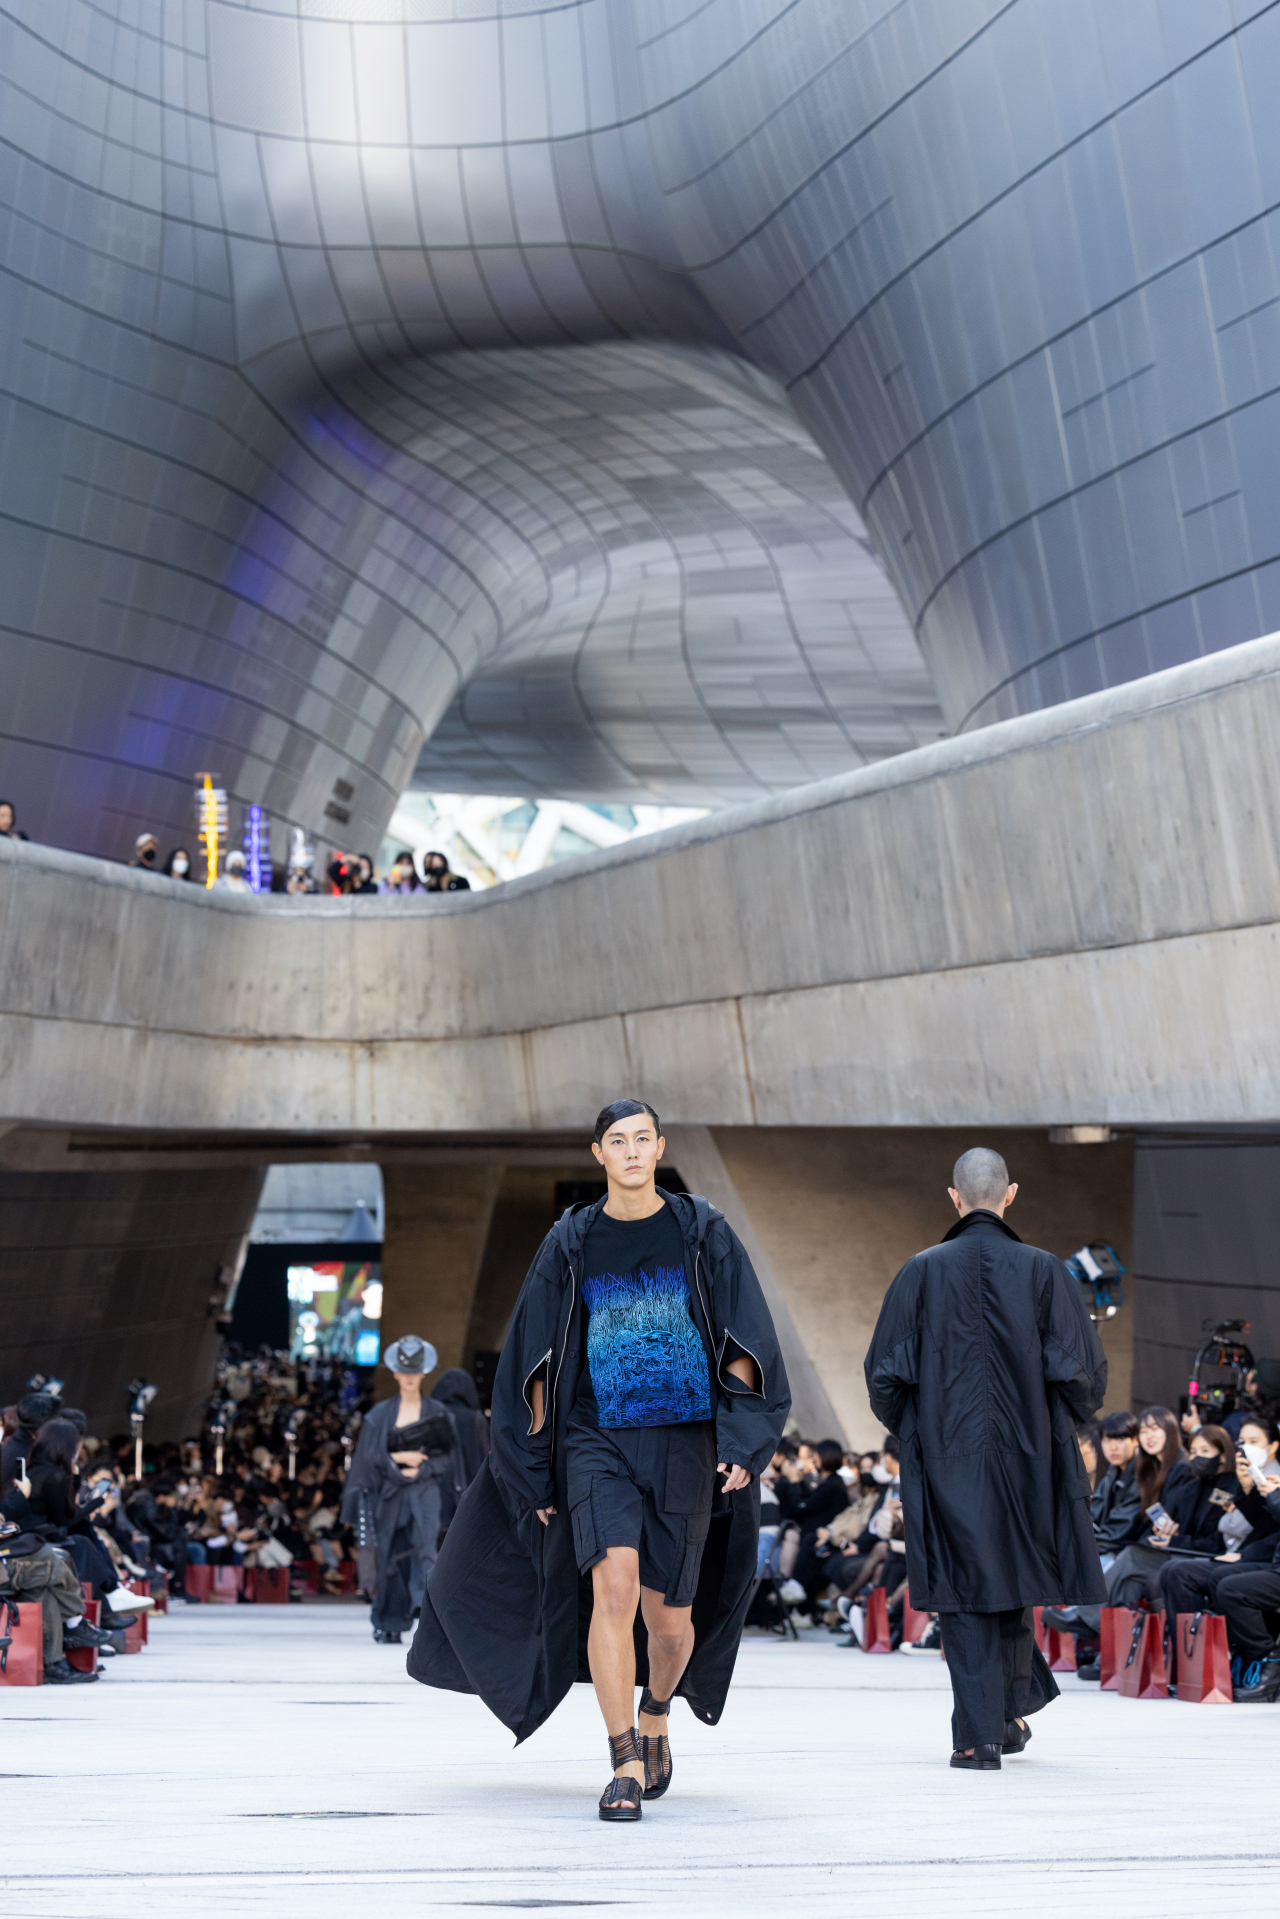 Models walk the 120-meter outdoor runway presenting Songzio's 2023 spring-summer collection Tuesday on the opening day of Seoul Fashion Week. (Seoul Fashion Week)